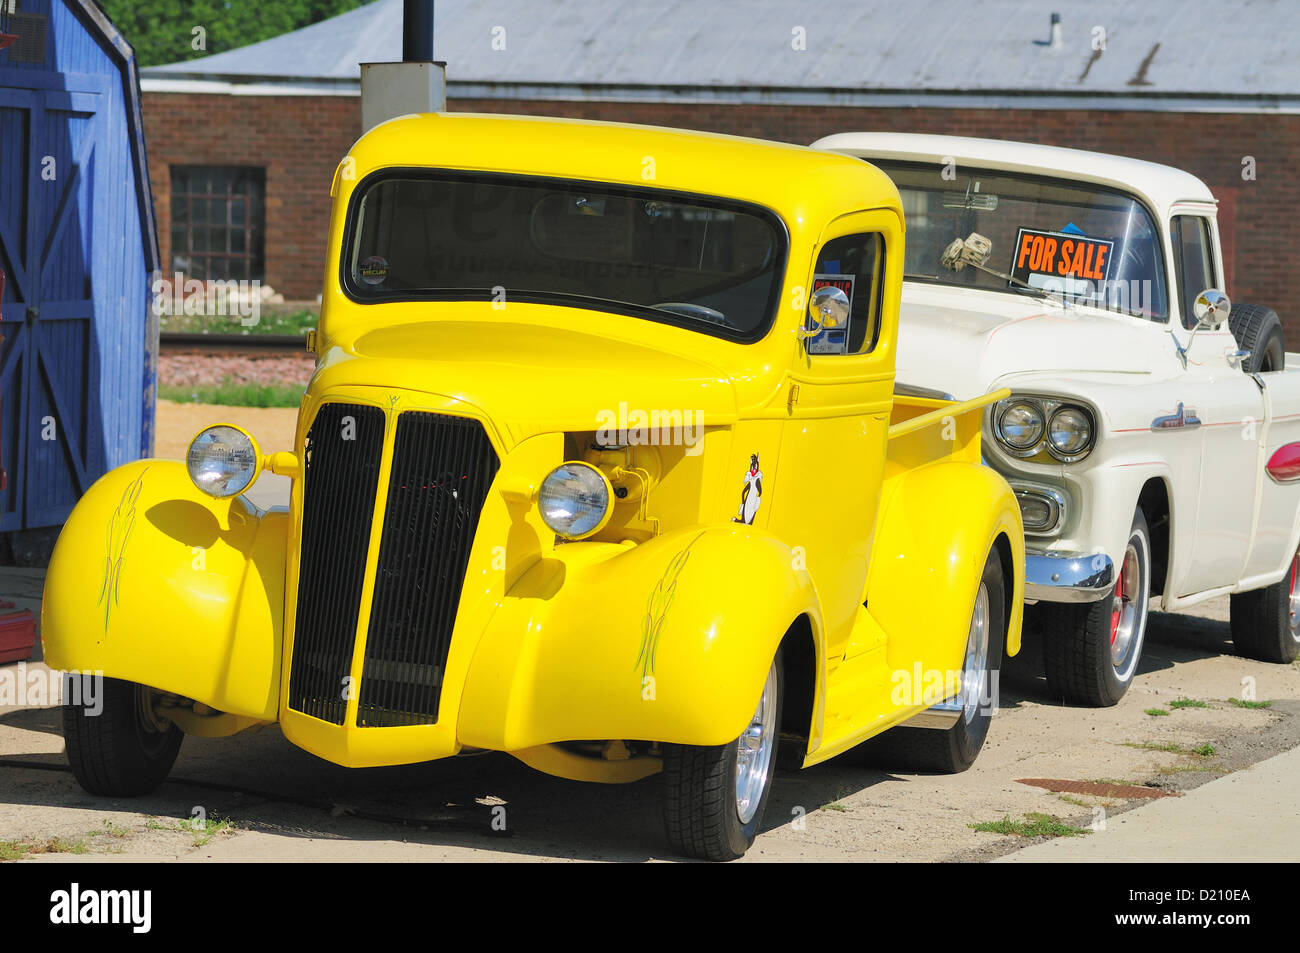 Vintage pickup trucks are on sale in service station in rural Illinois Stock Photo